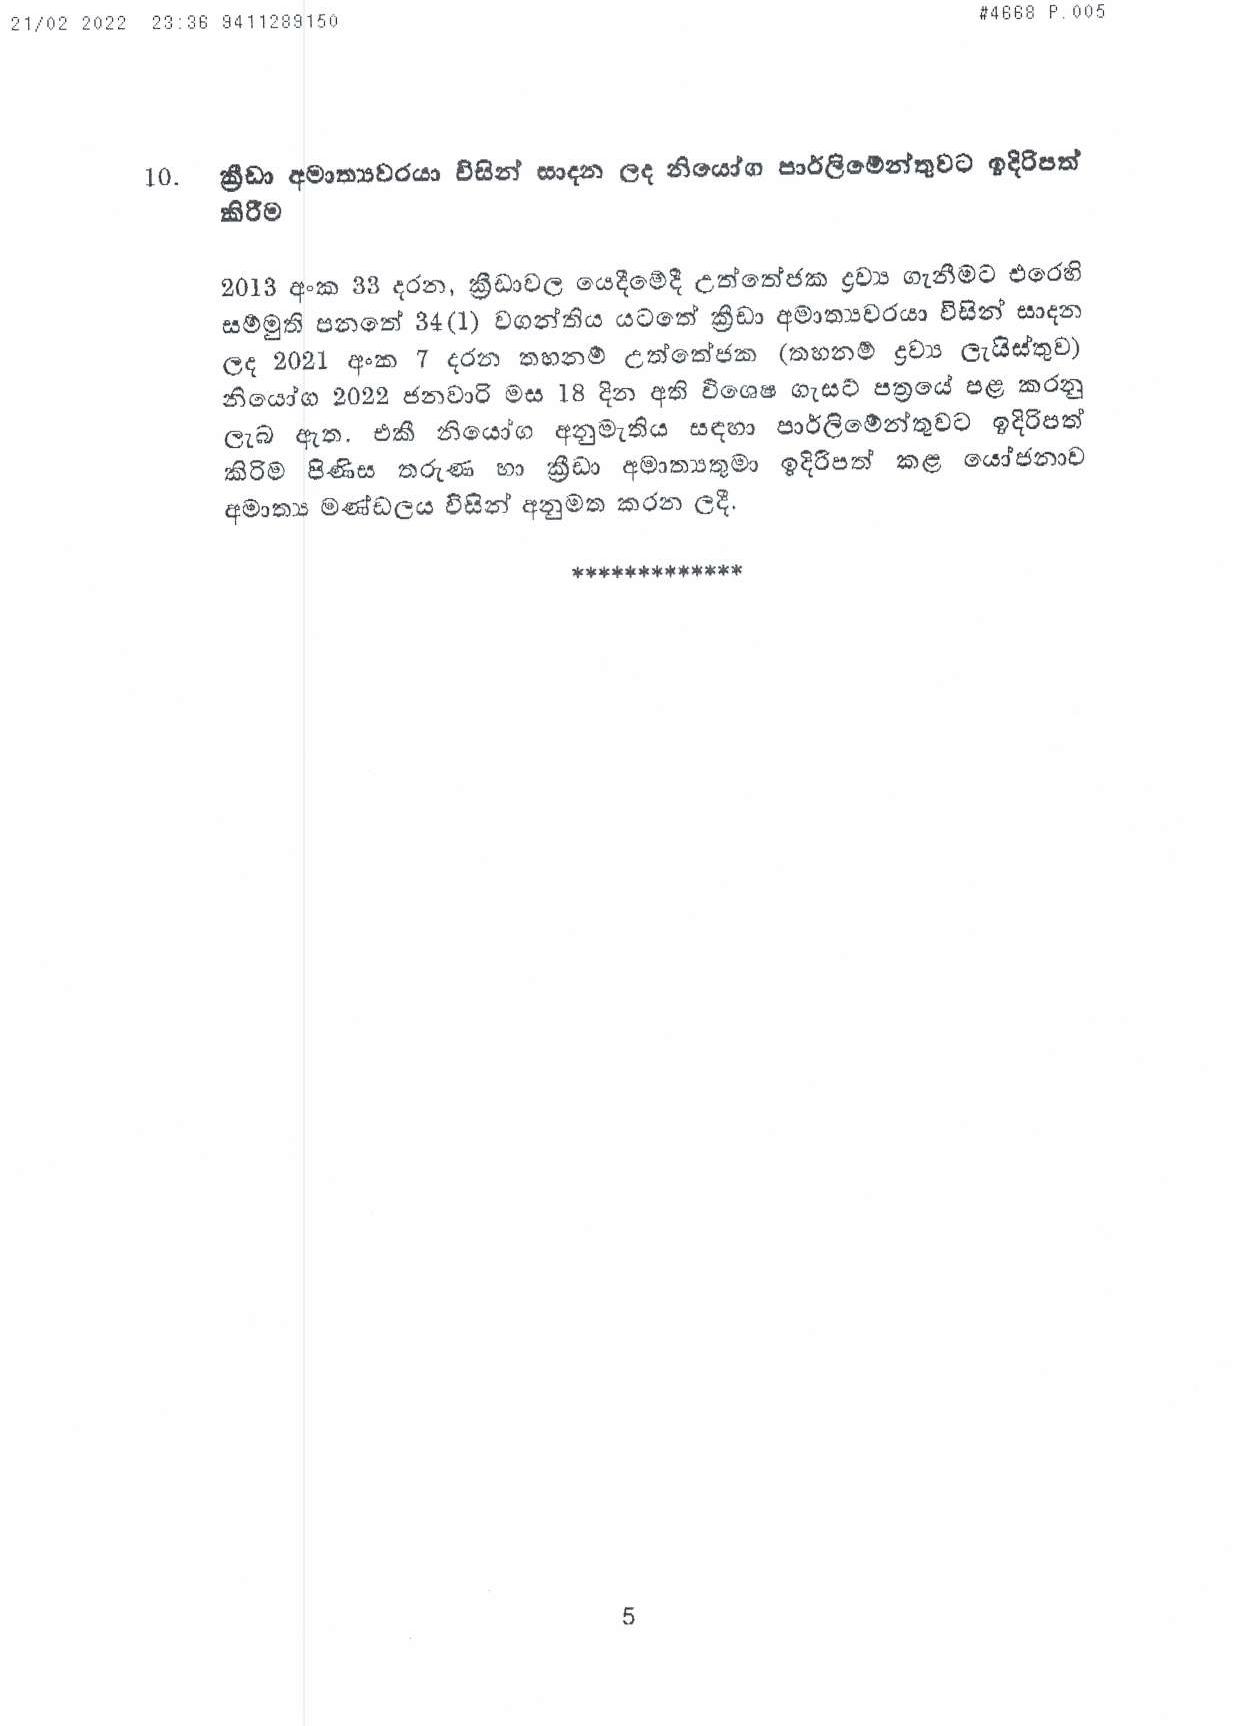 Cabinet Decision on 21.02.2022 page 005